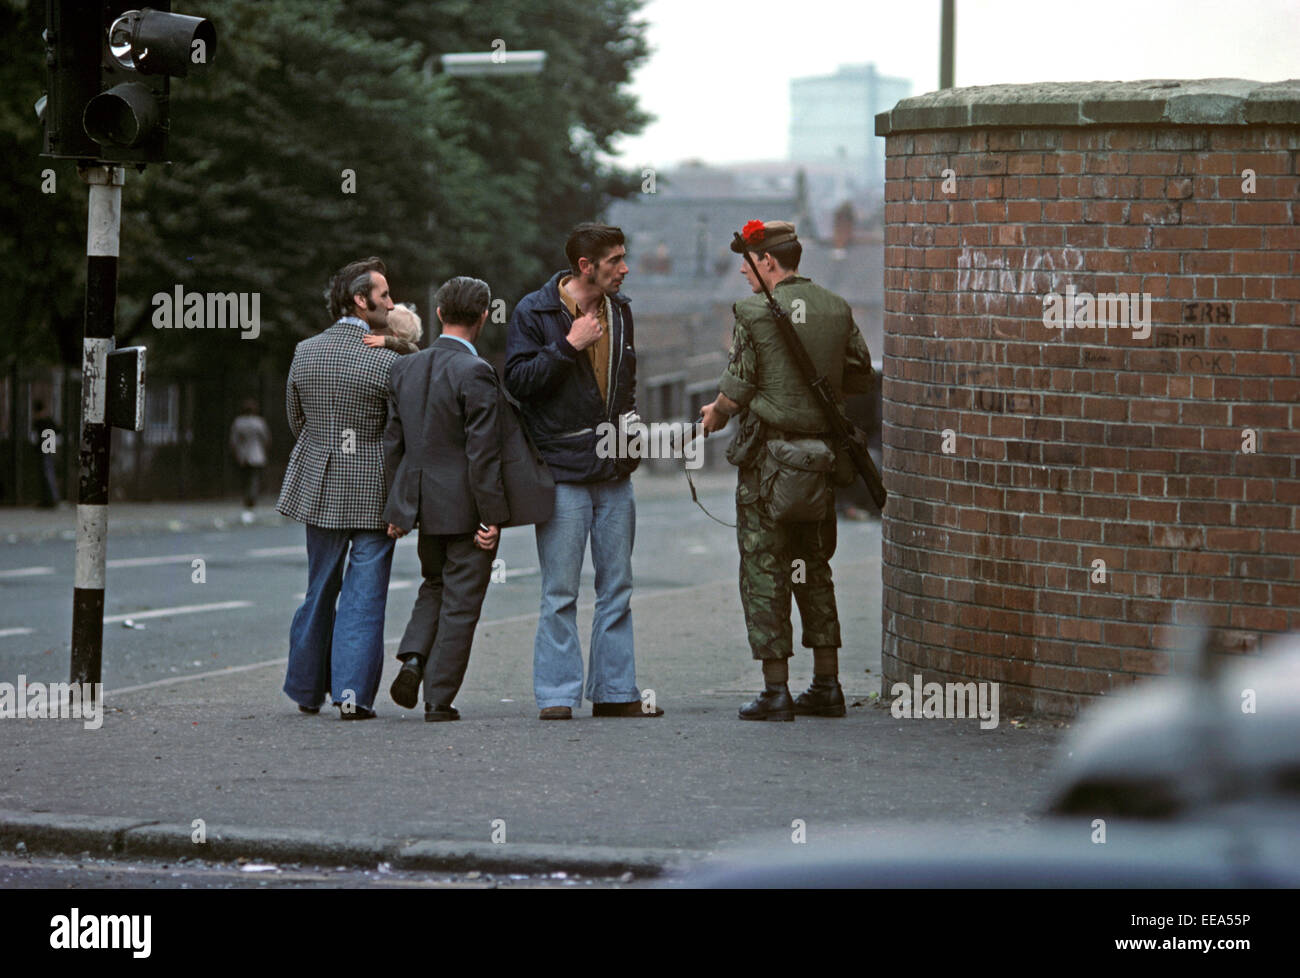 BELFAST, NORTHERN IRELAND - AUGUST 1976. Nationalist being questioned by British Army Soldier during The Troubles, Falls Road, West Belfast, Northern Ireland. Stock Photo